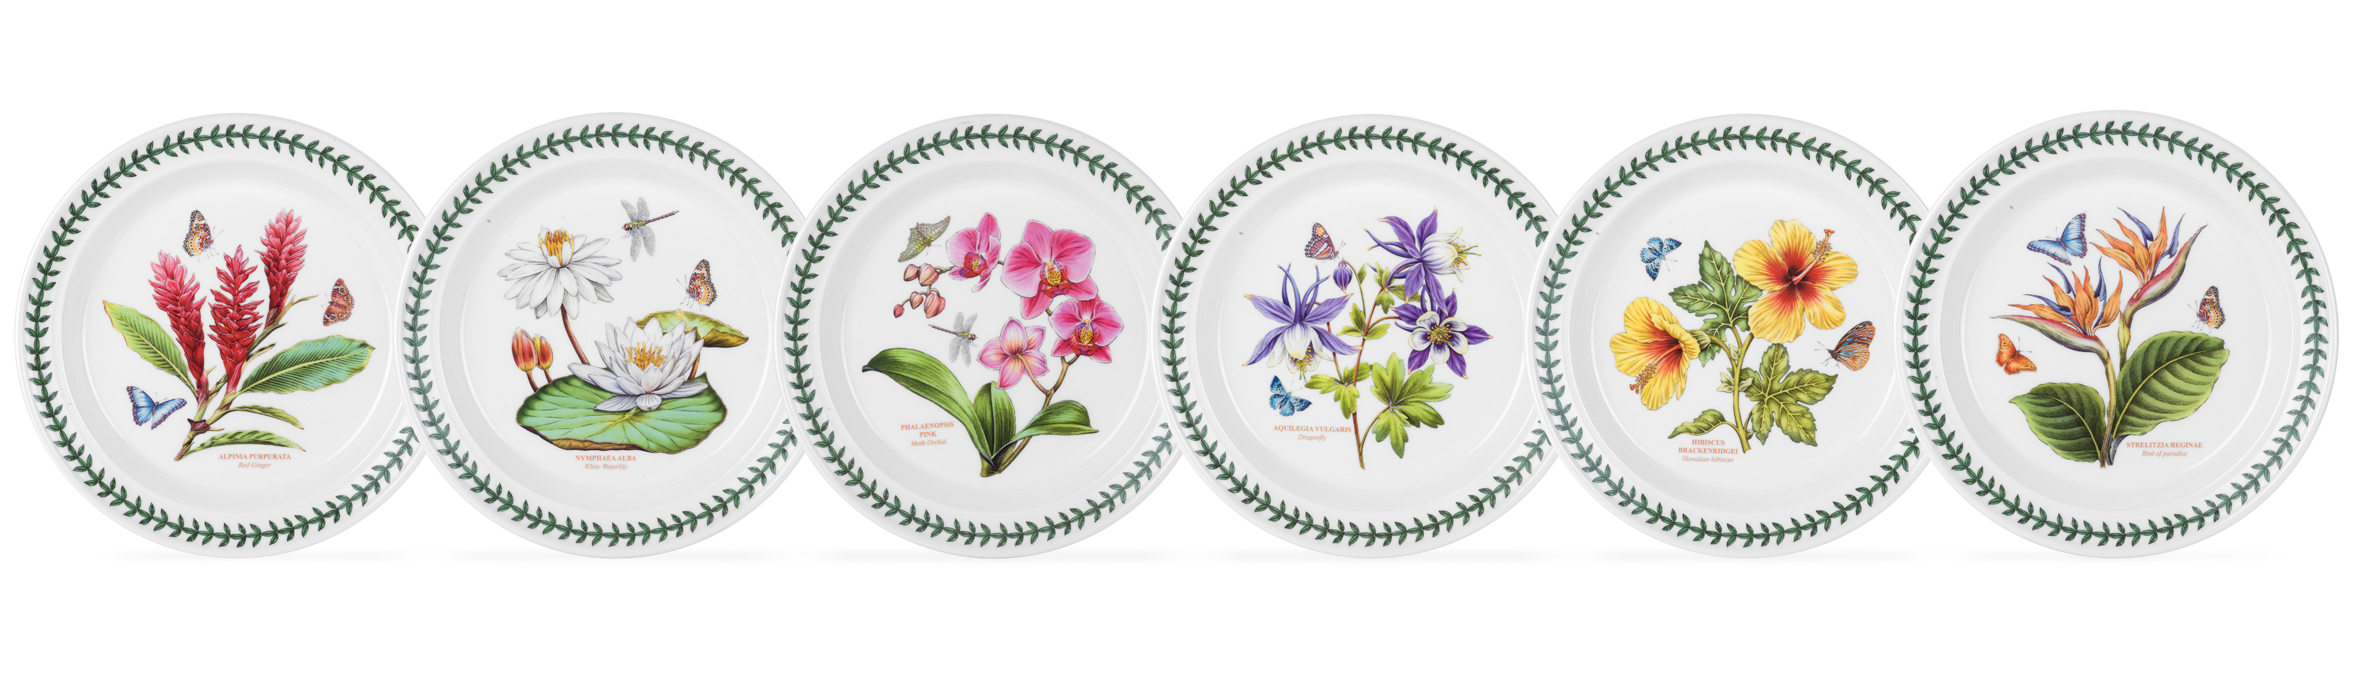 Exotic Botanic Garden 10.5 Inch Dinner Plate Set of 6 (Assorted Motifs) image number null